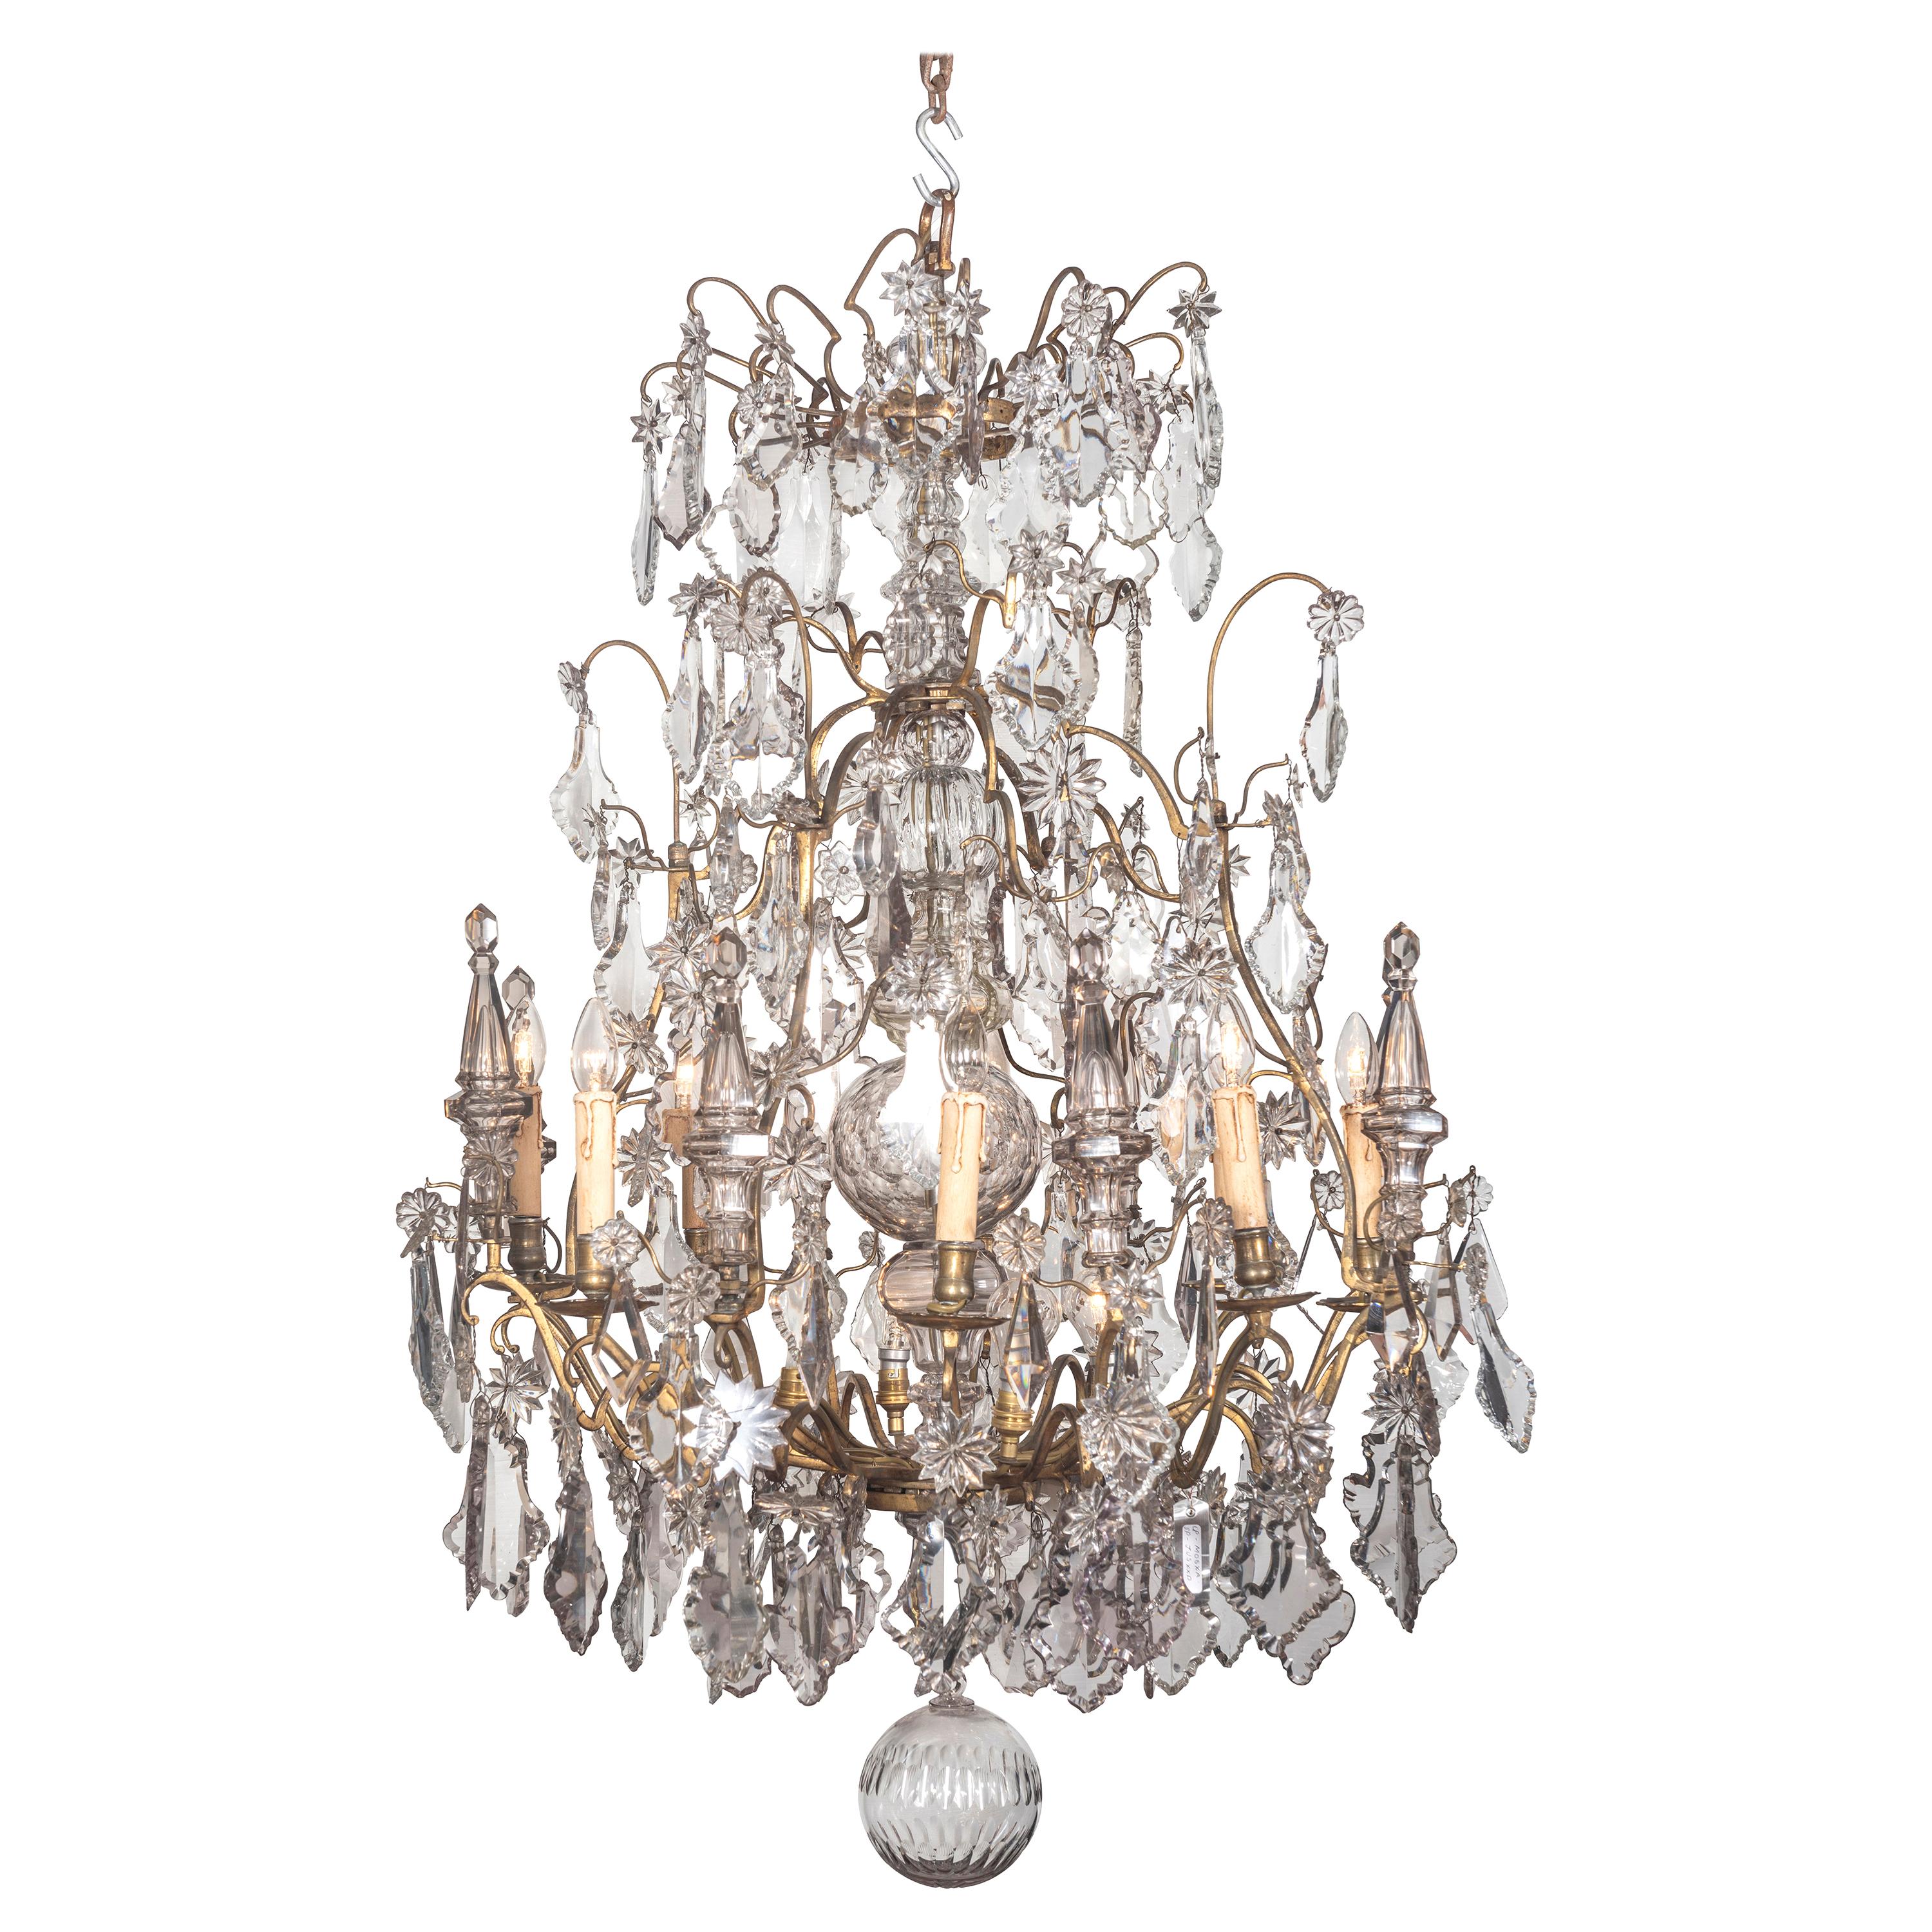 A 19th Century French Louis XV Style Crystal and Gilt Twenty-Light Chandelier For Sale